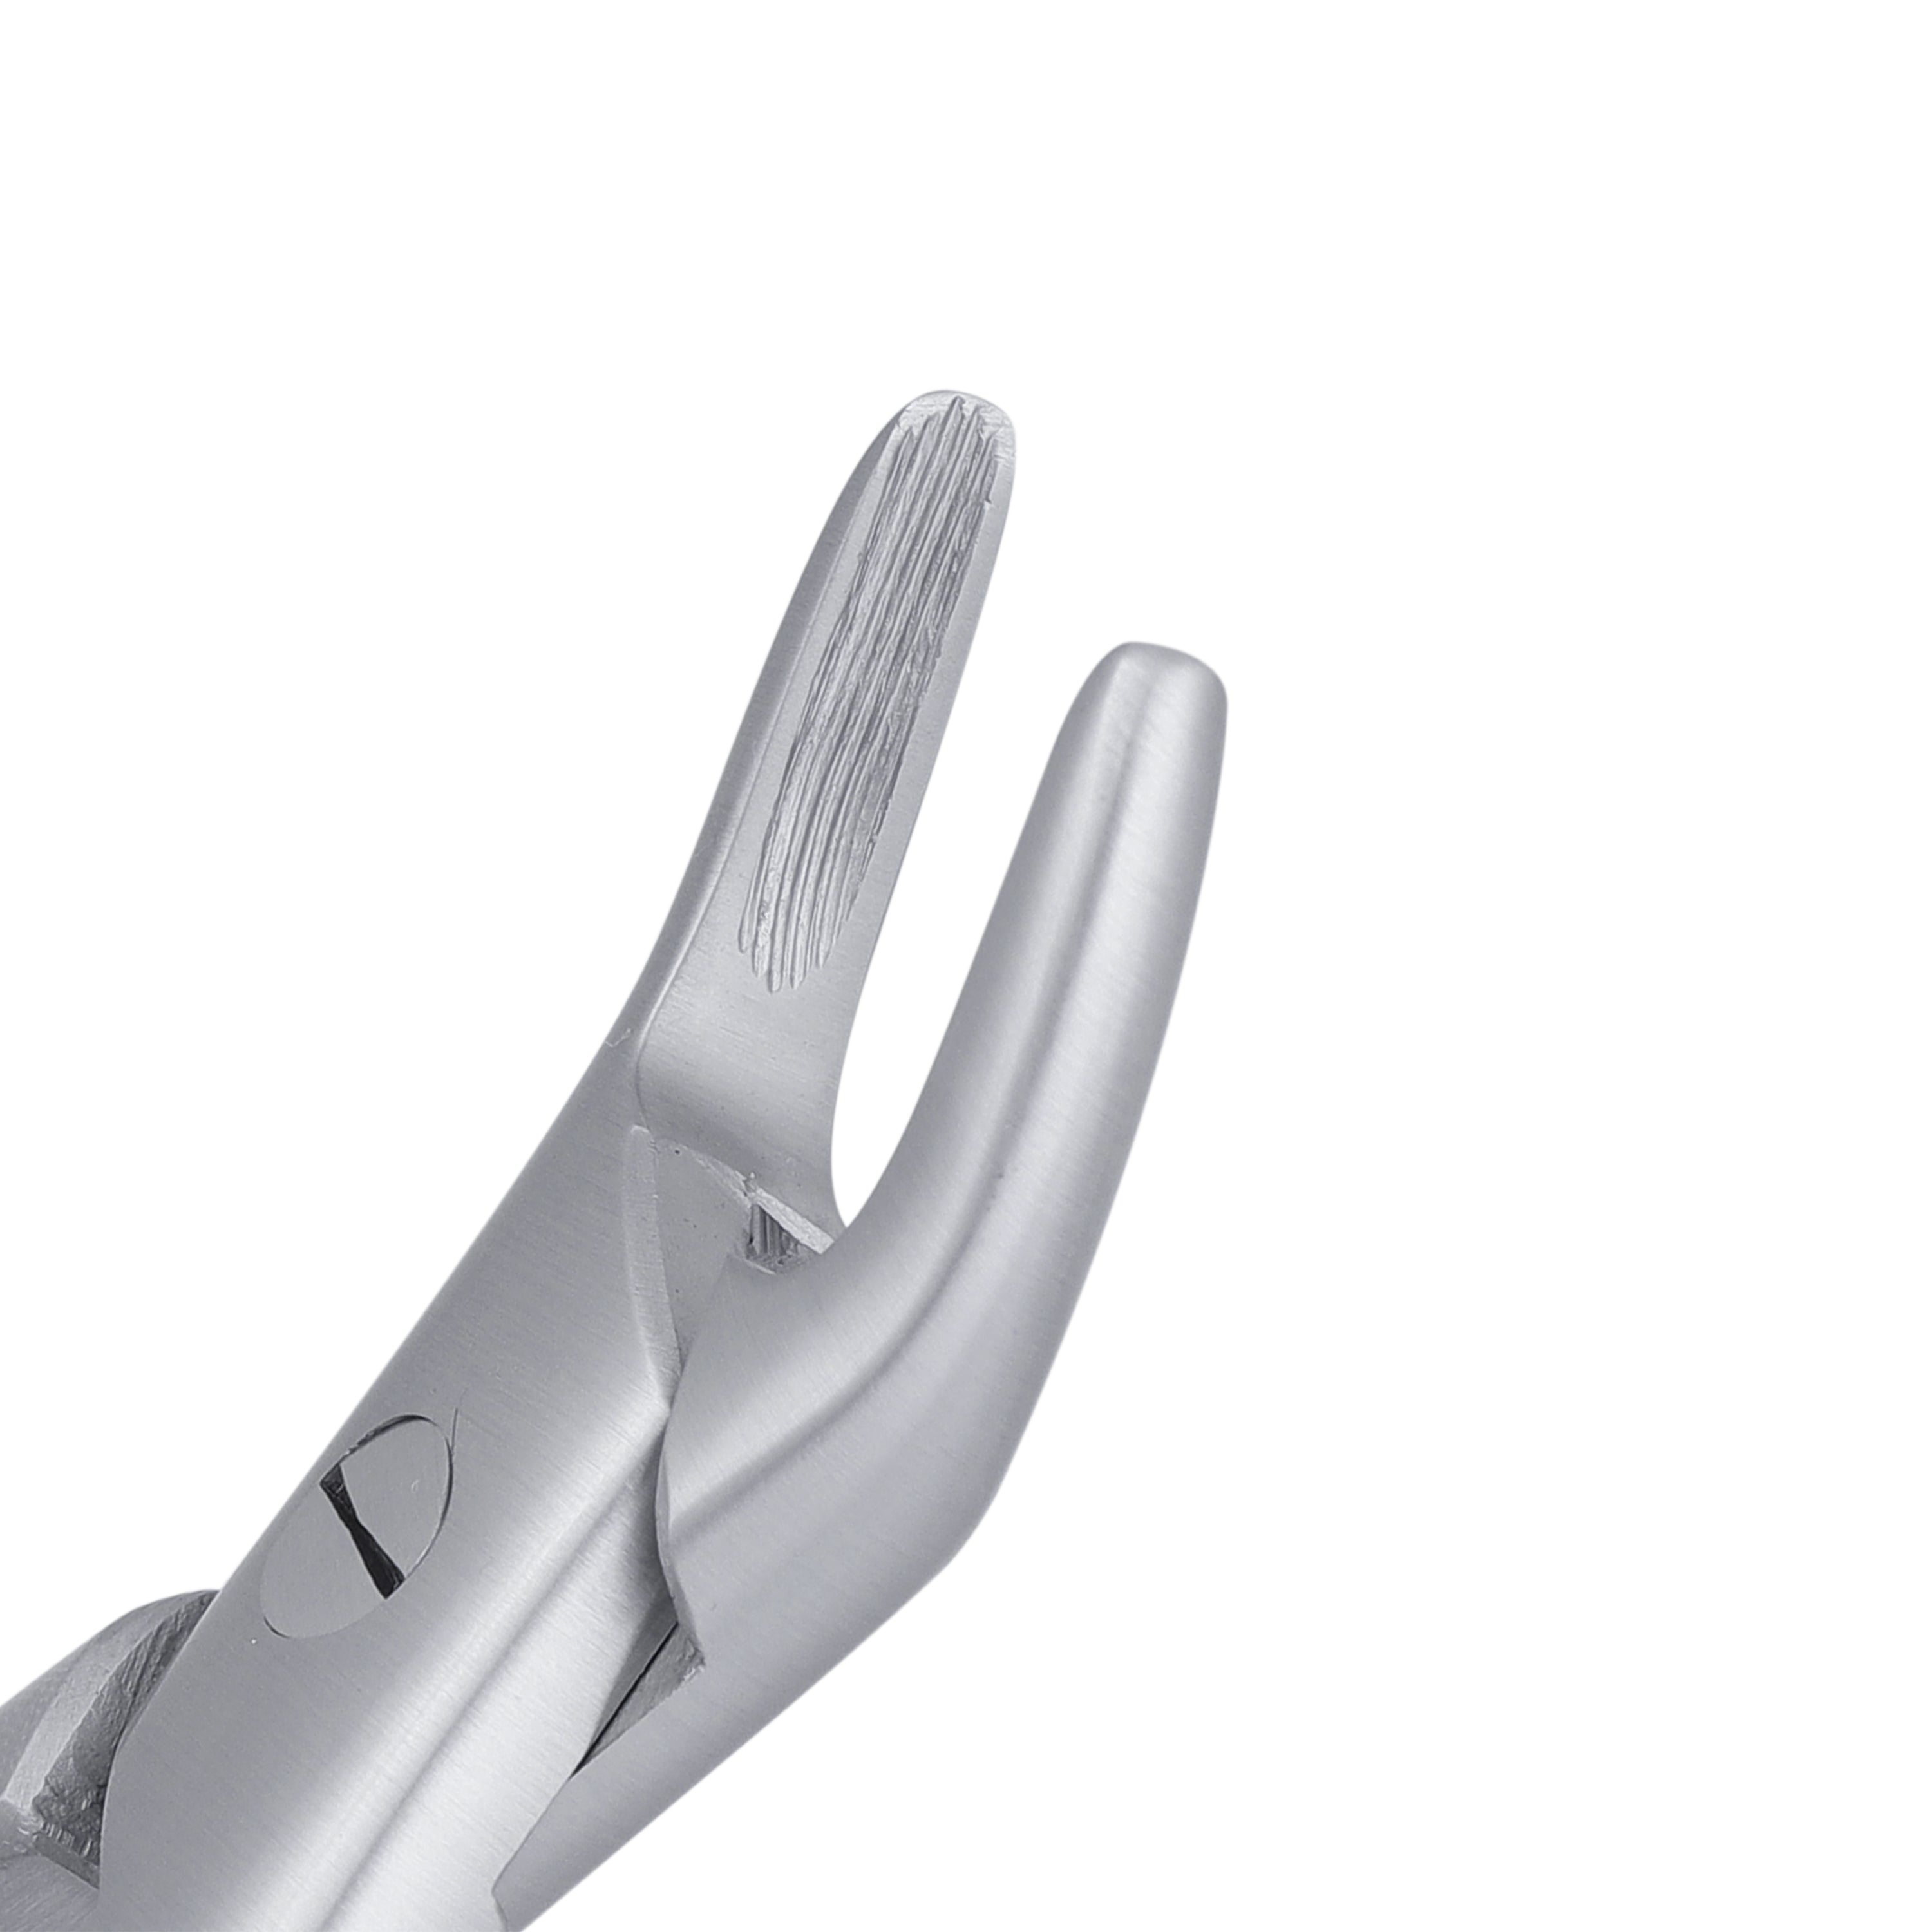 76S Upper Roots Serrated Extraction Forceps - HiTeck Medical Instruments